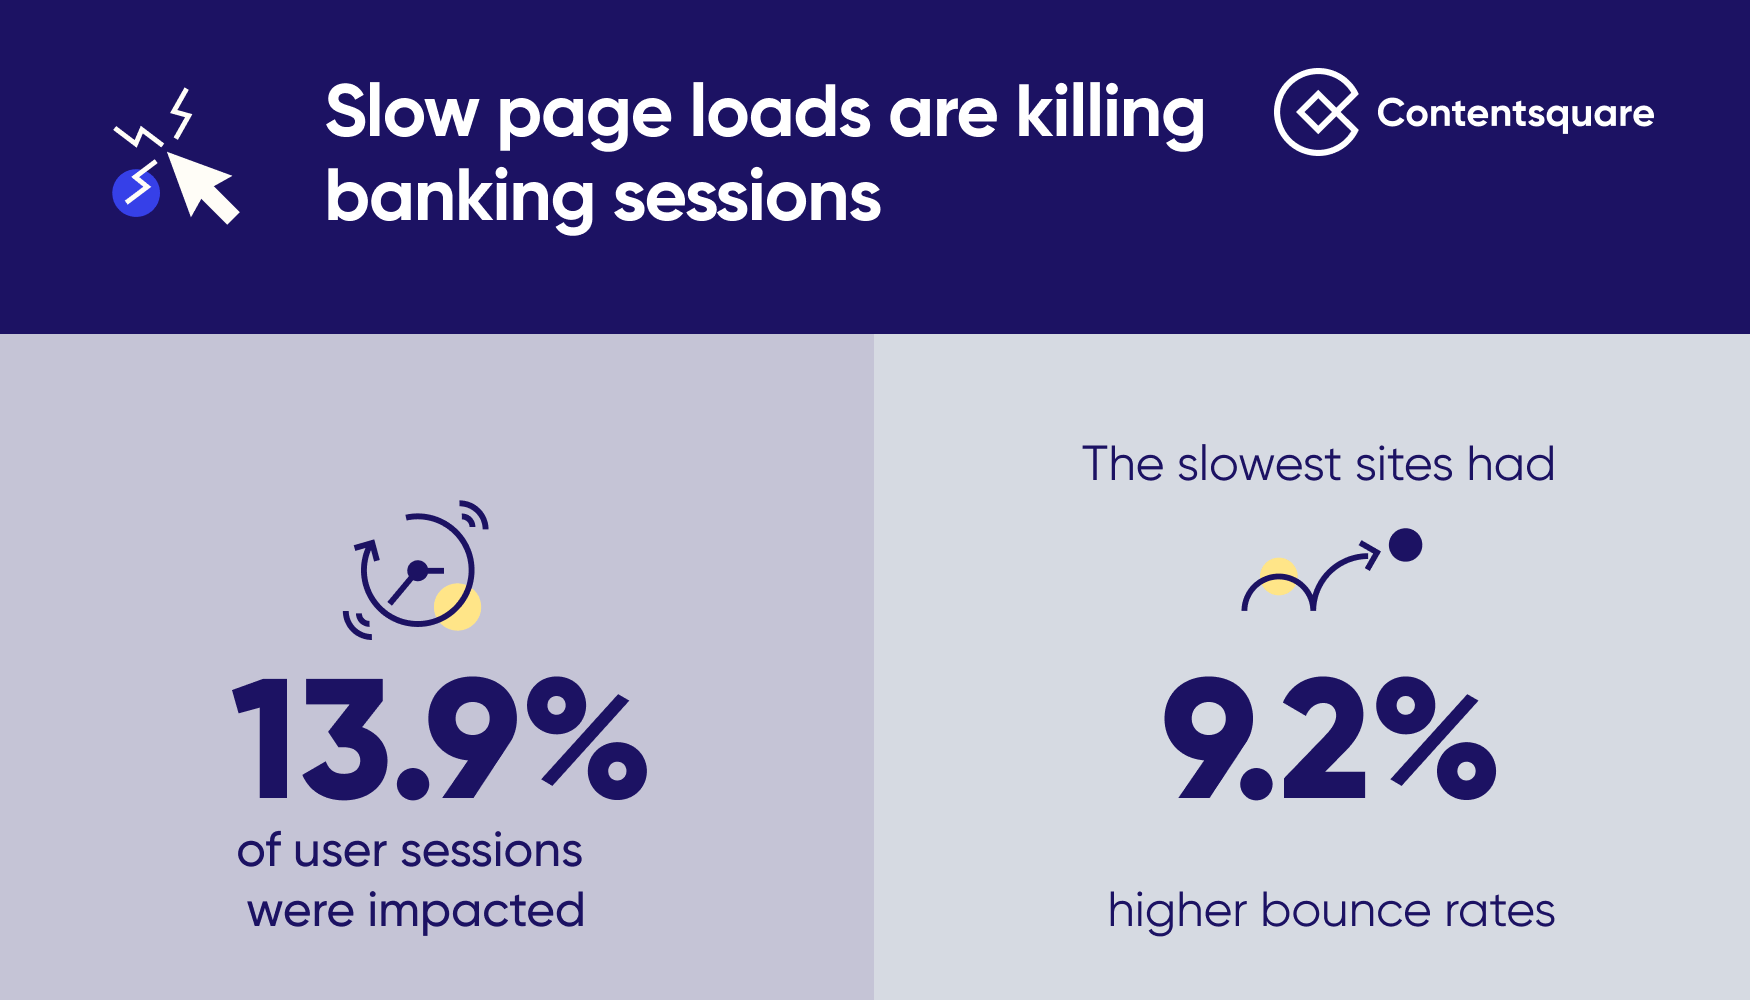 How slow page loads are negatively affecting the insurance and banking customer journey 